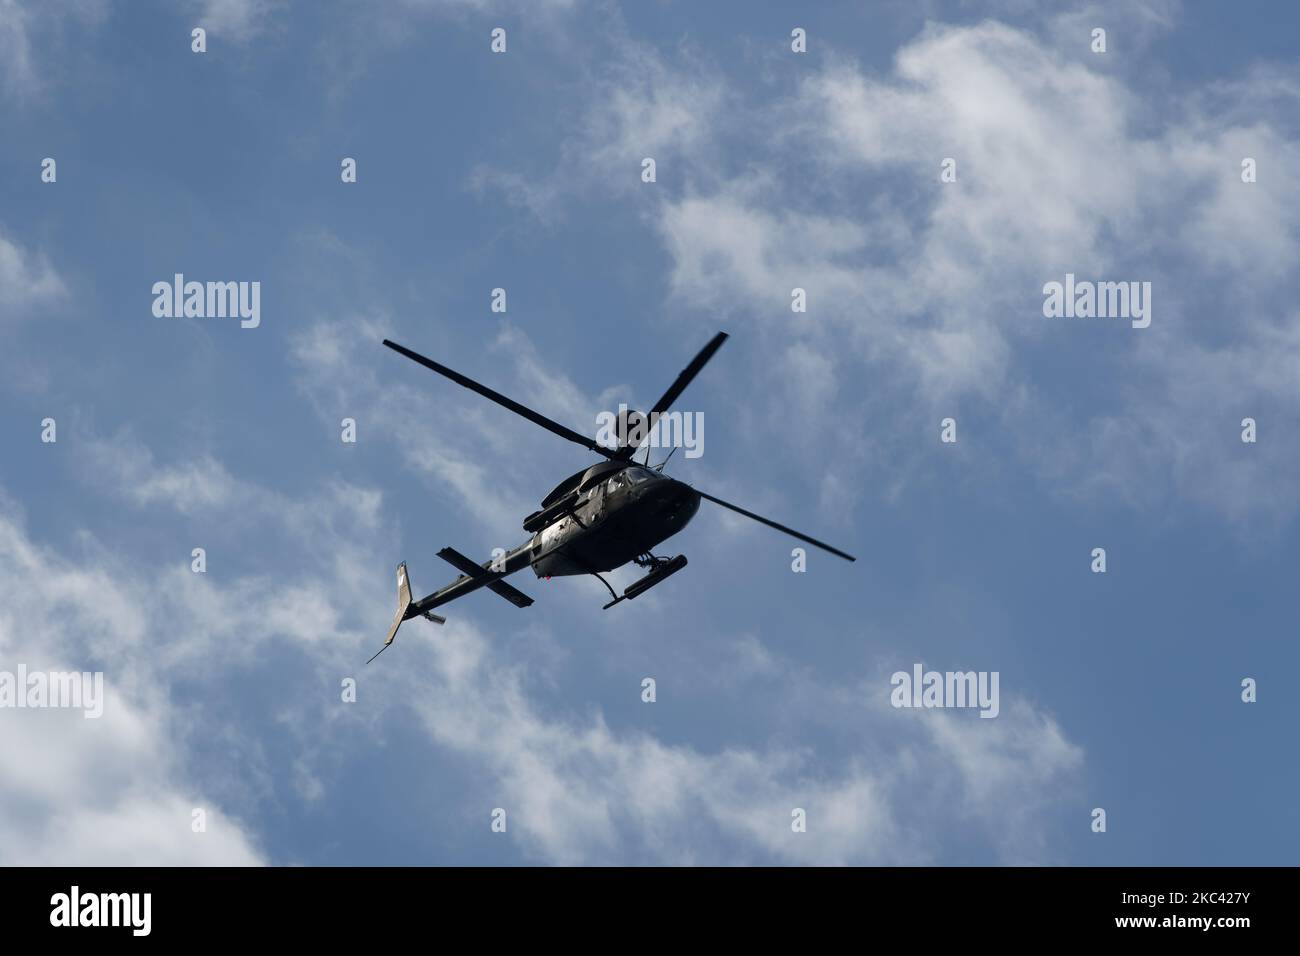 Kiowa Warrior helicopter during an air show. Greek Air Force Bell OH-58 flying during the National Oxi Day parade in Thessaloniki, Greece. Stock Photo